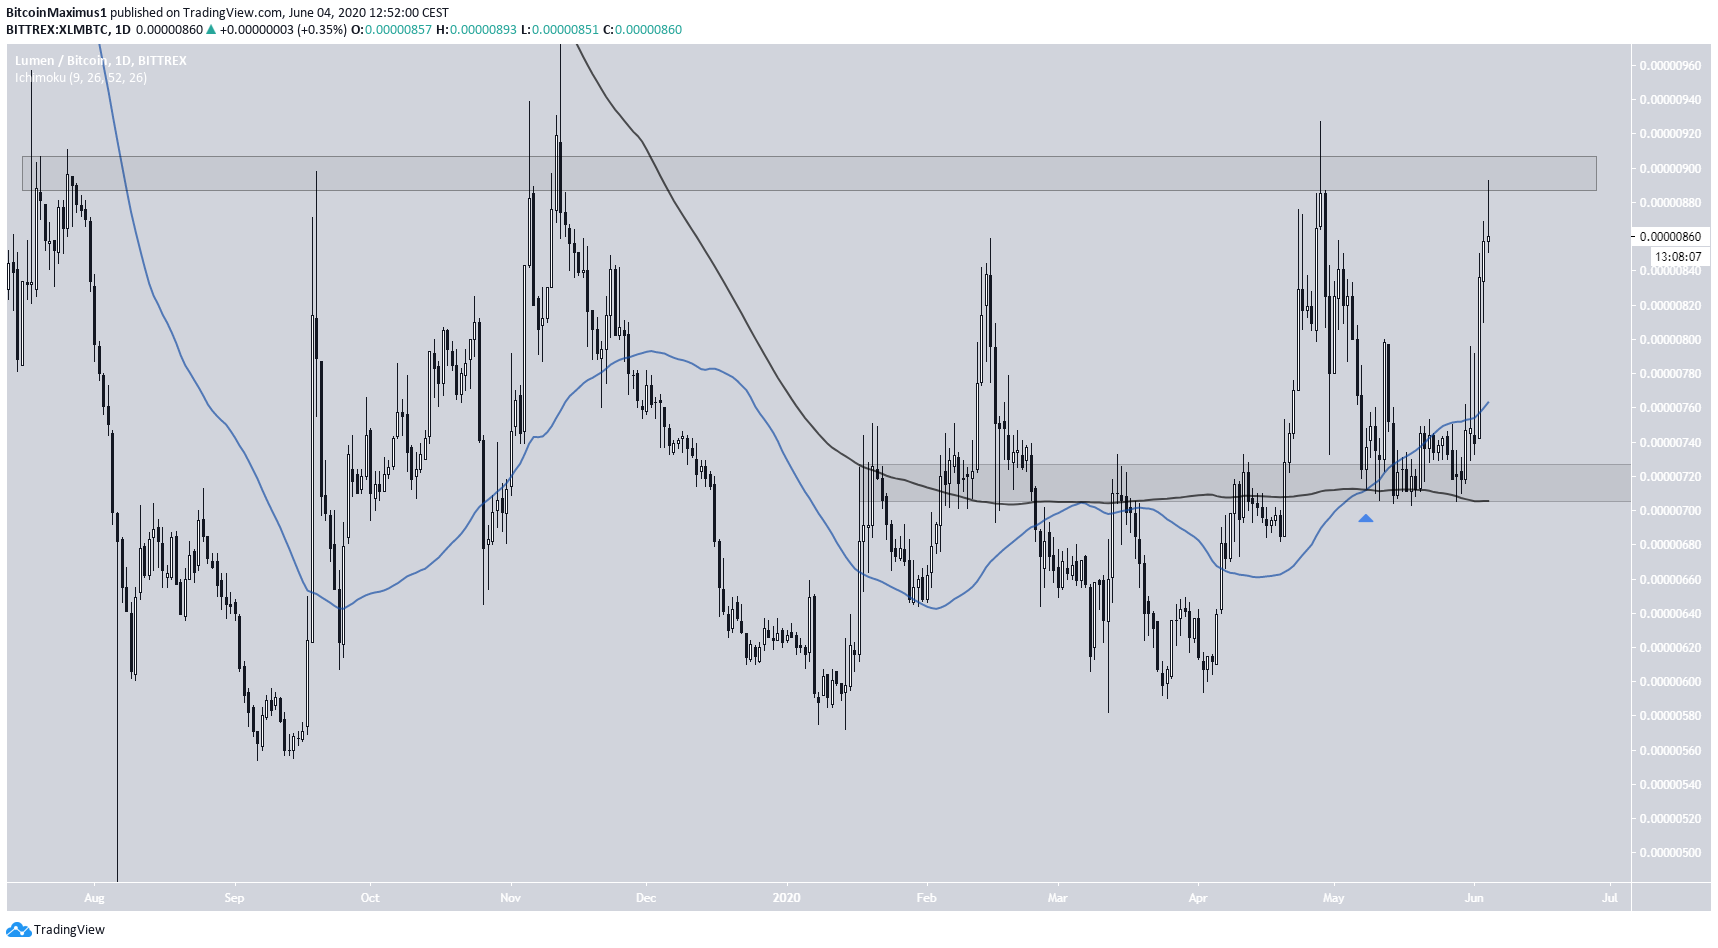 XLM Daily Time-frame